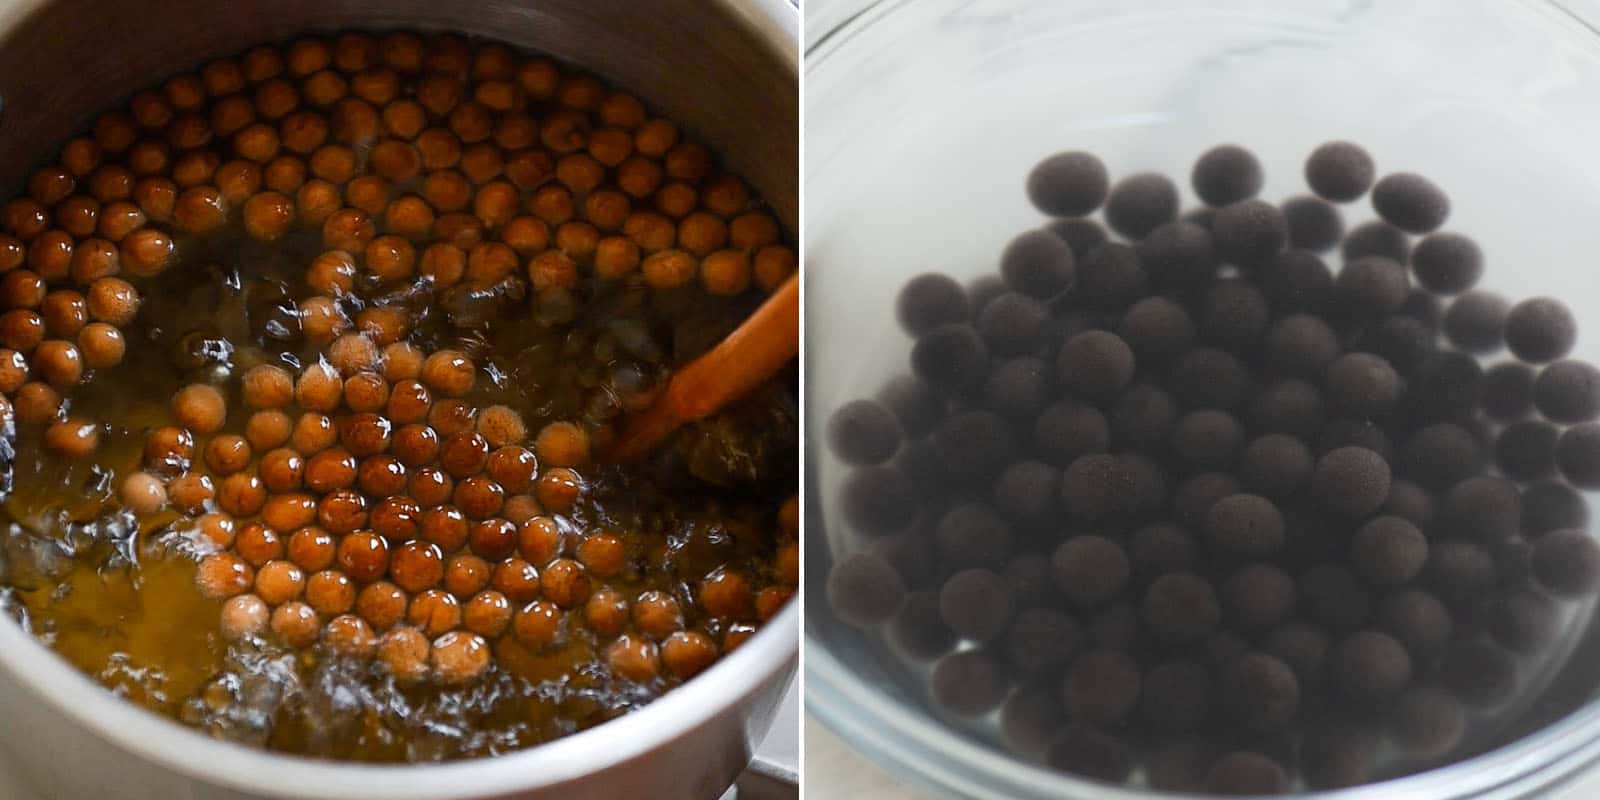 Cooking brown and black boba